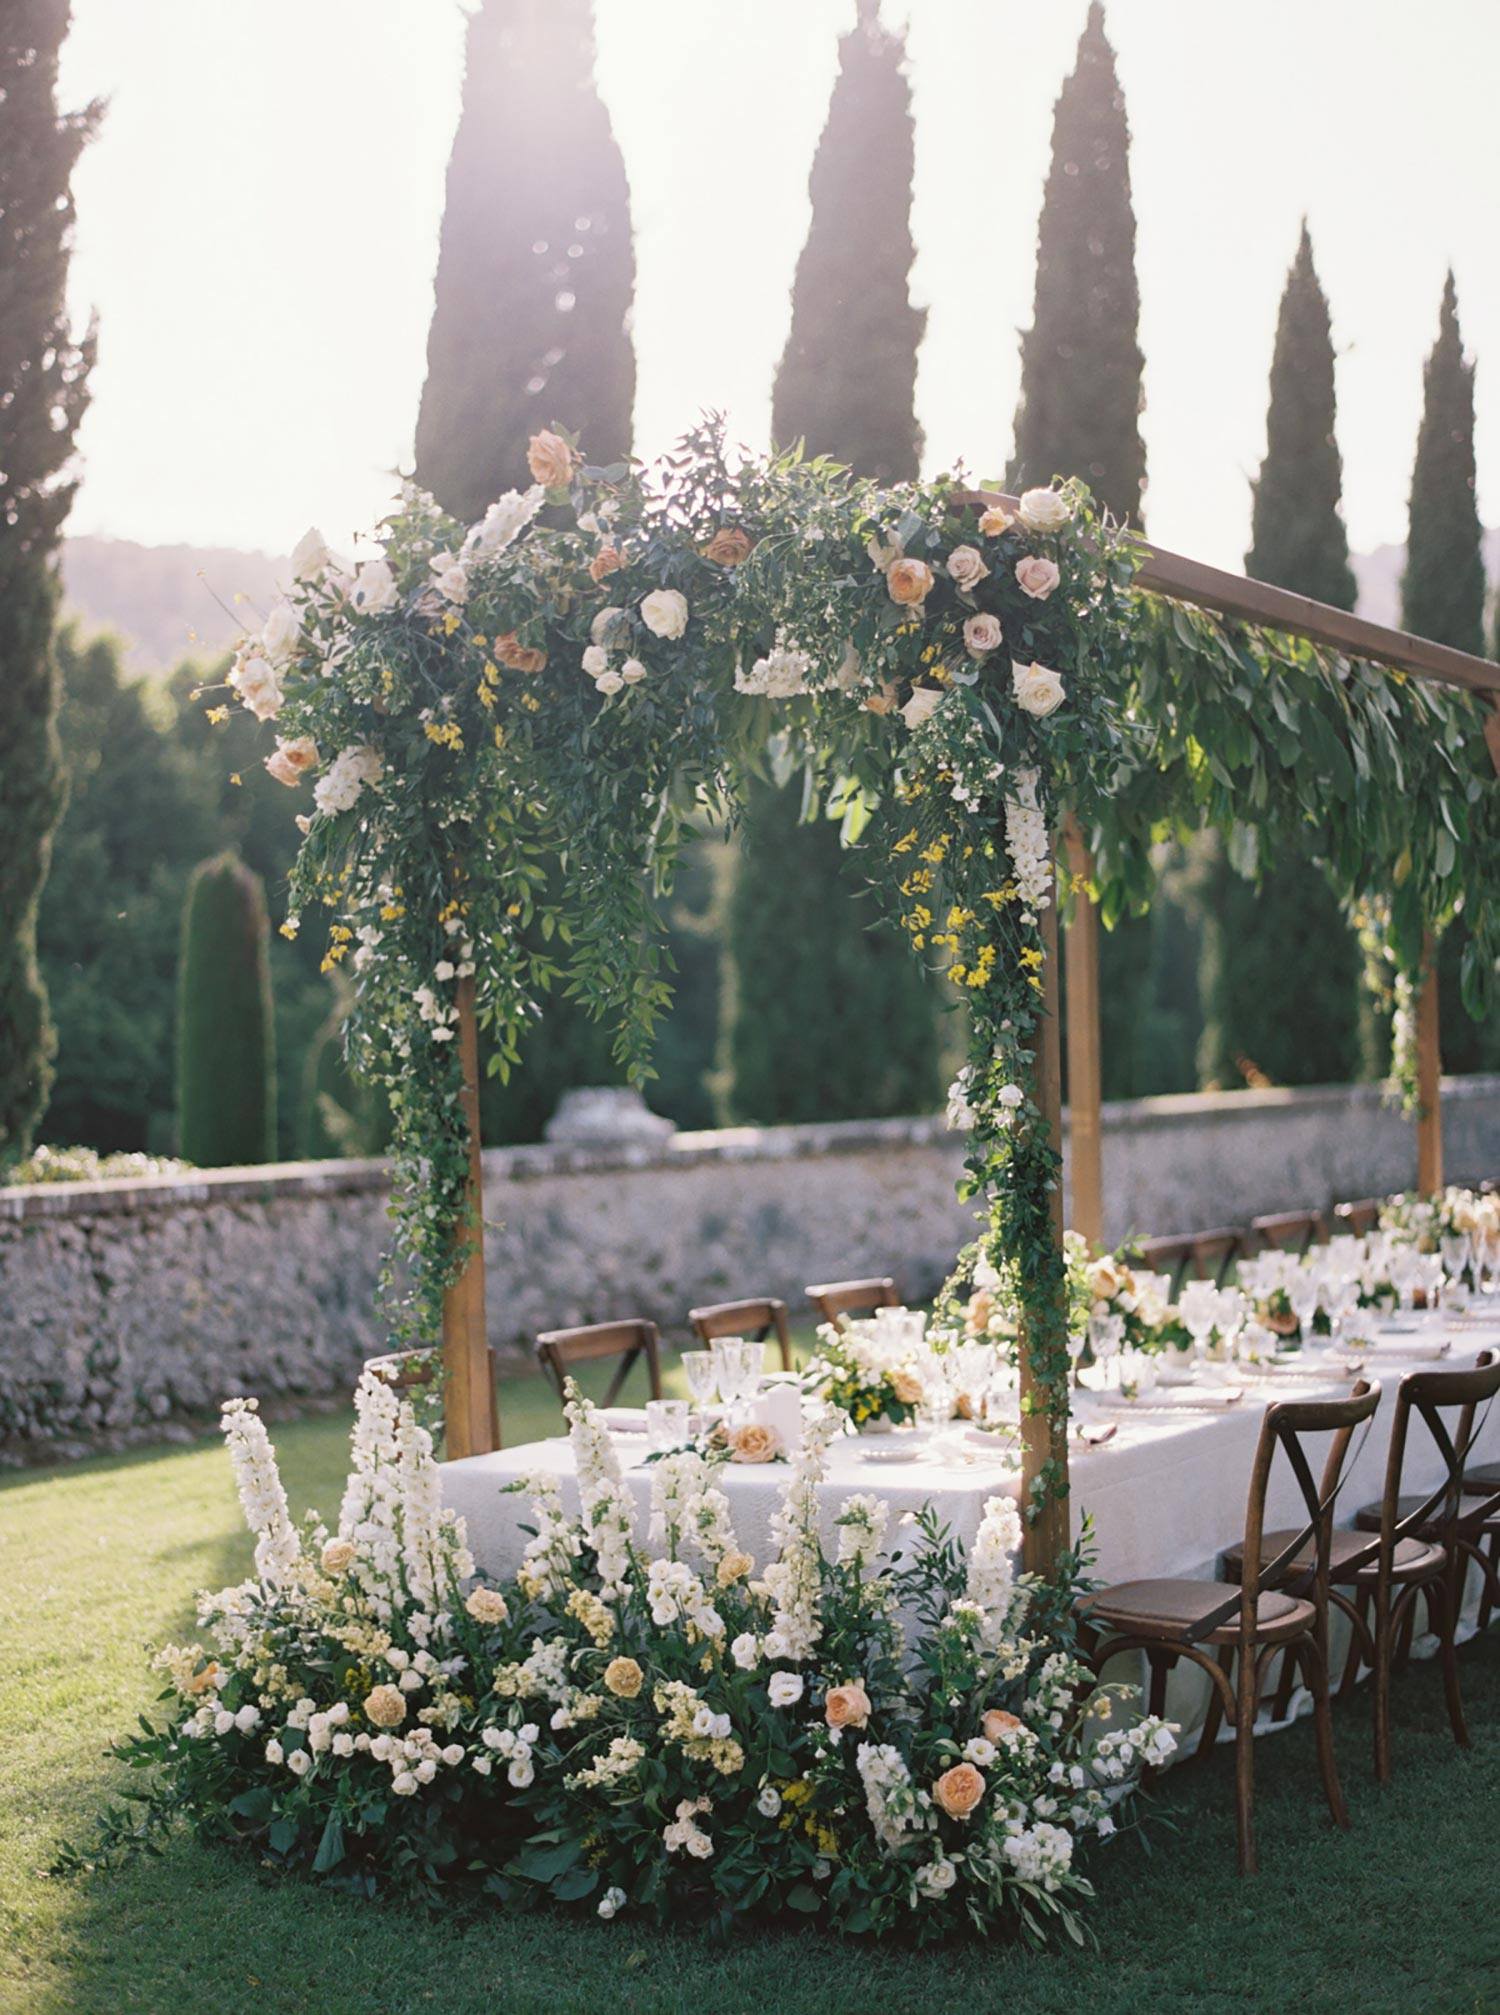 al fresco wedding dinner with family style tablescape, lush ground floral arrangements and a wooden structure suspending greenery and flowers above the entire table